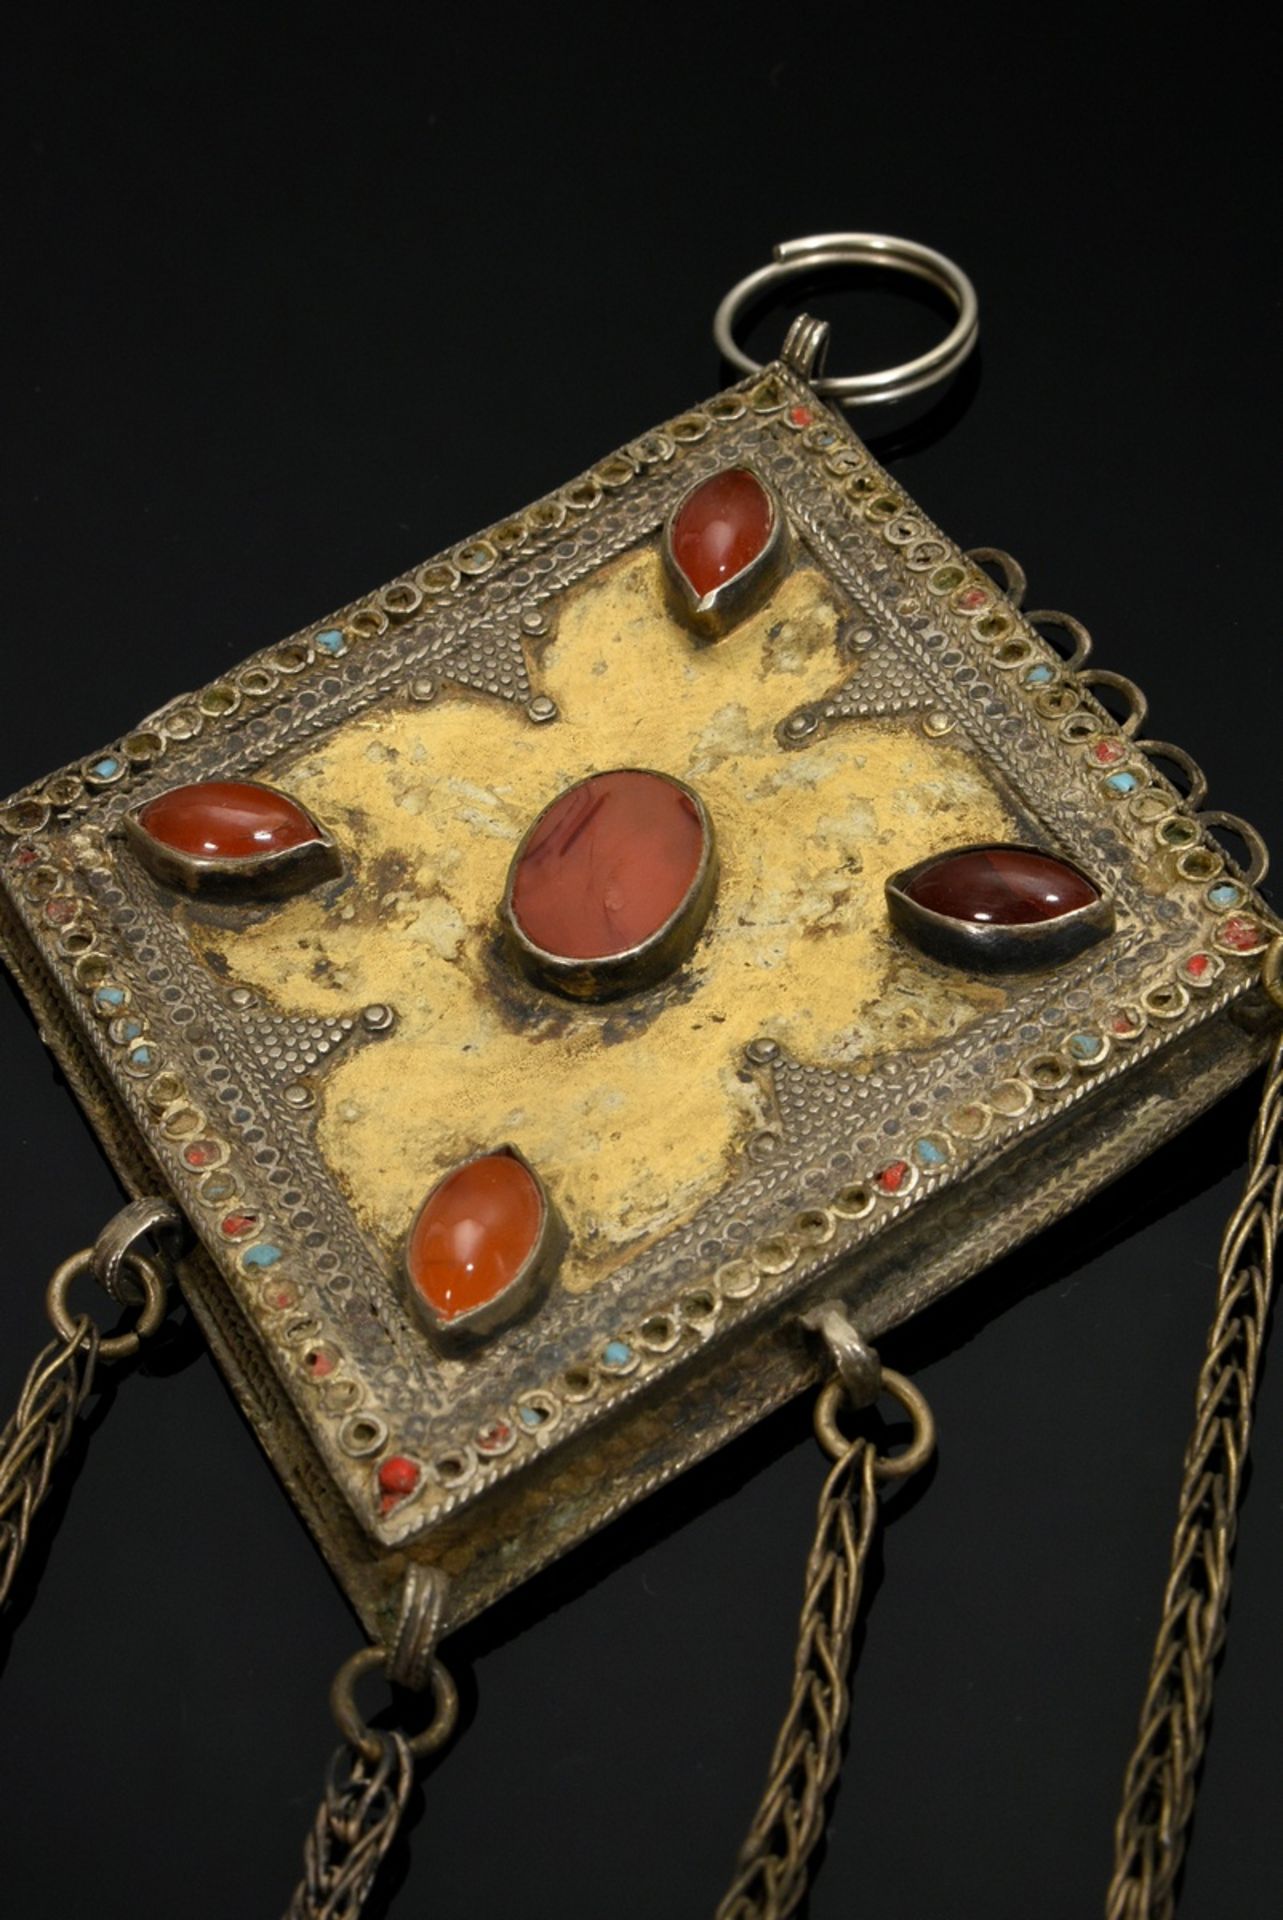 3 Yomud Turkmen amulets with bell pendants: 2 boys' amulets for hunting "Ok Yay" and a trapezoid pe - Image 4 of 8